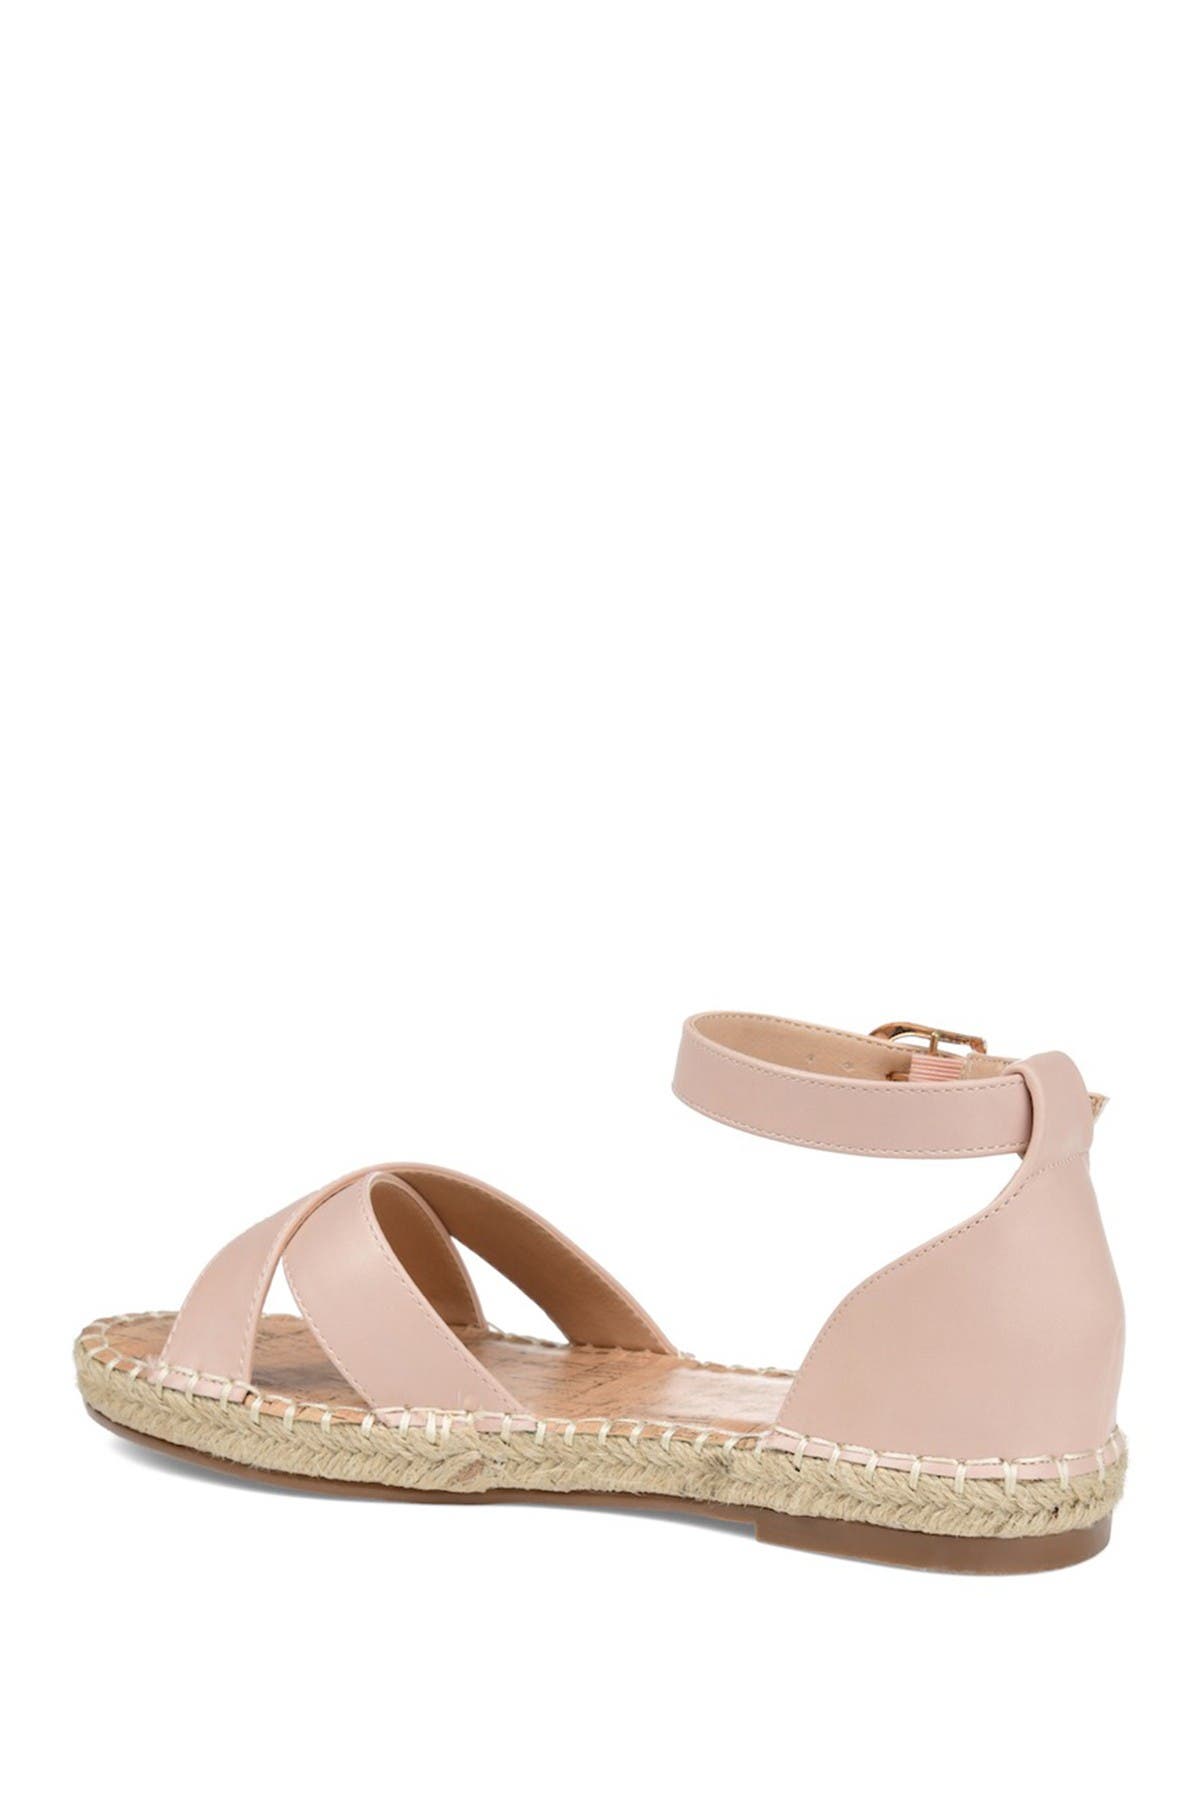 Journee Collection Lyddia Espadrille Sandal In Light/pastel Pink